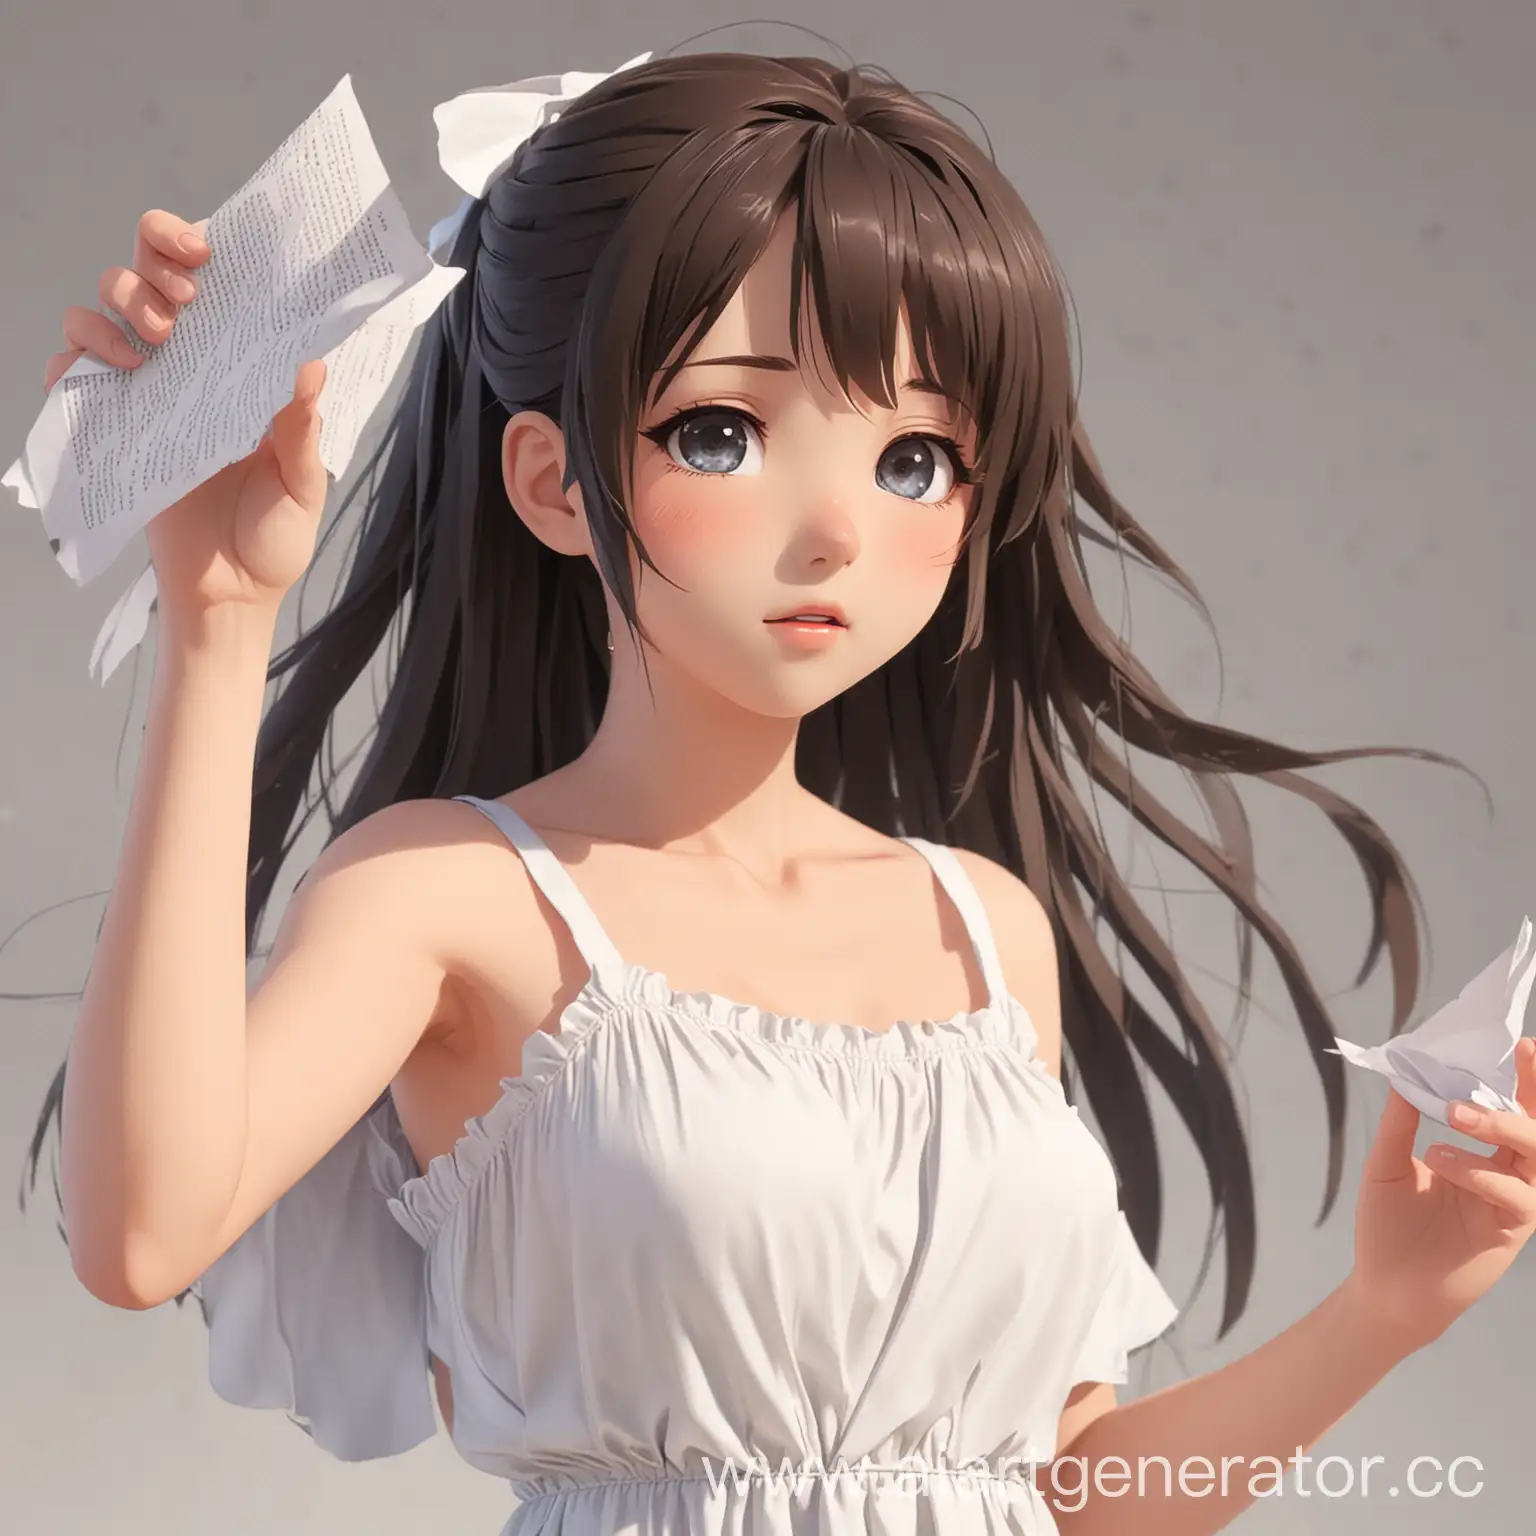 Anime-Girl-in-White-Sundress-with-Eyes-Closed-Reaching-Forward-with-Paper